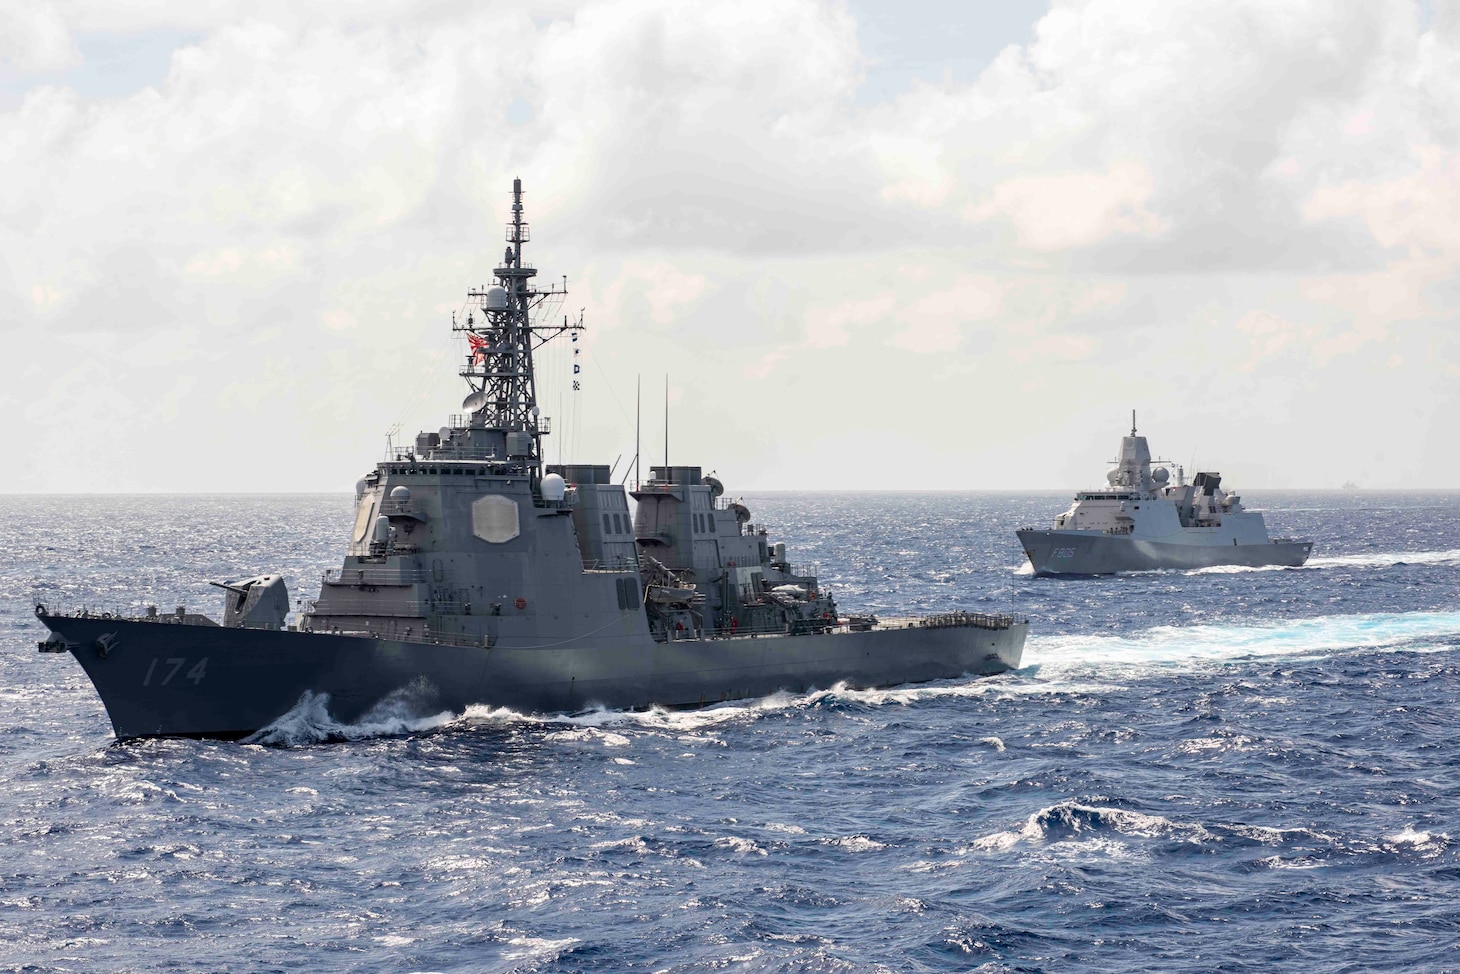 211003-N-WS494-1022 PHILIPPINE SEA (Oct. 3, 2021) From left, the Japan Maritime Self-Defense Force (JMSDF) guided-missile destroyer, JS Kirishima (DDG 174), steams alongside Netherlands navy guided-missile frigate, BEL Evertson (FFG F805), during a photo exercise with multiple carrier strike groups. The integrated at-sea operations brought together more than 15,000 Sailors across six nations, and demonstrates the U.S. Navy’s ability to work closely with its unmatched network of alliances and partnerships in support of a free and open Indo-Pacific. (Photo by Mass Communication Specialist 2nd Class Quinton A. Lee)